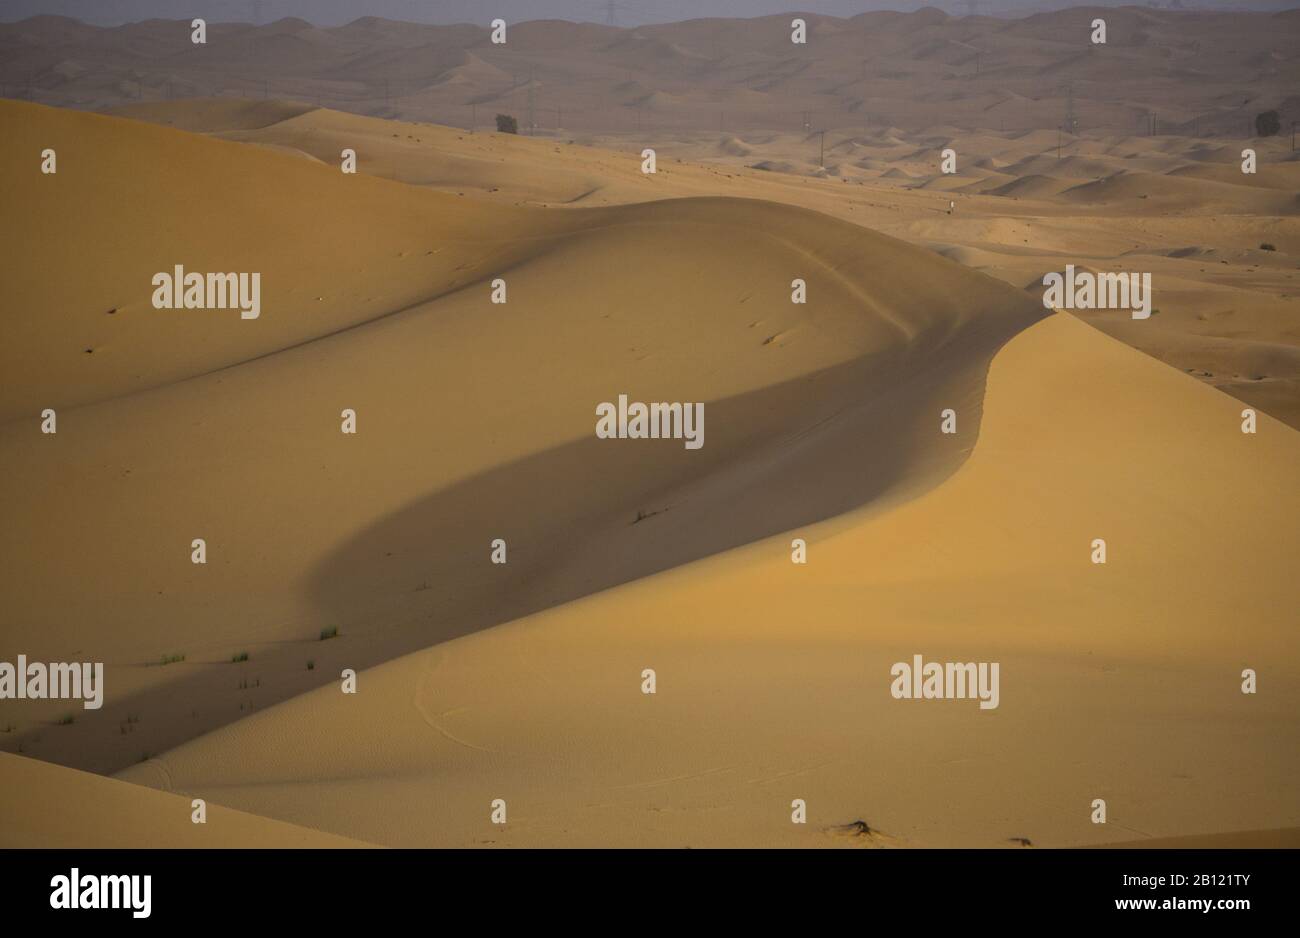 Late afternoon sunlight on a desert expanse Stock Photo